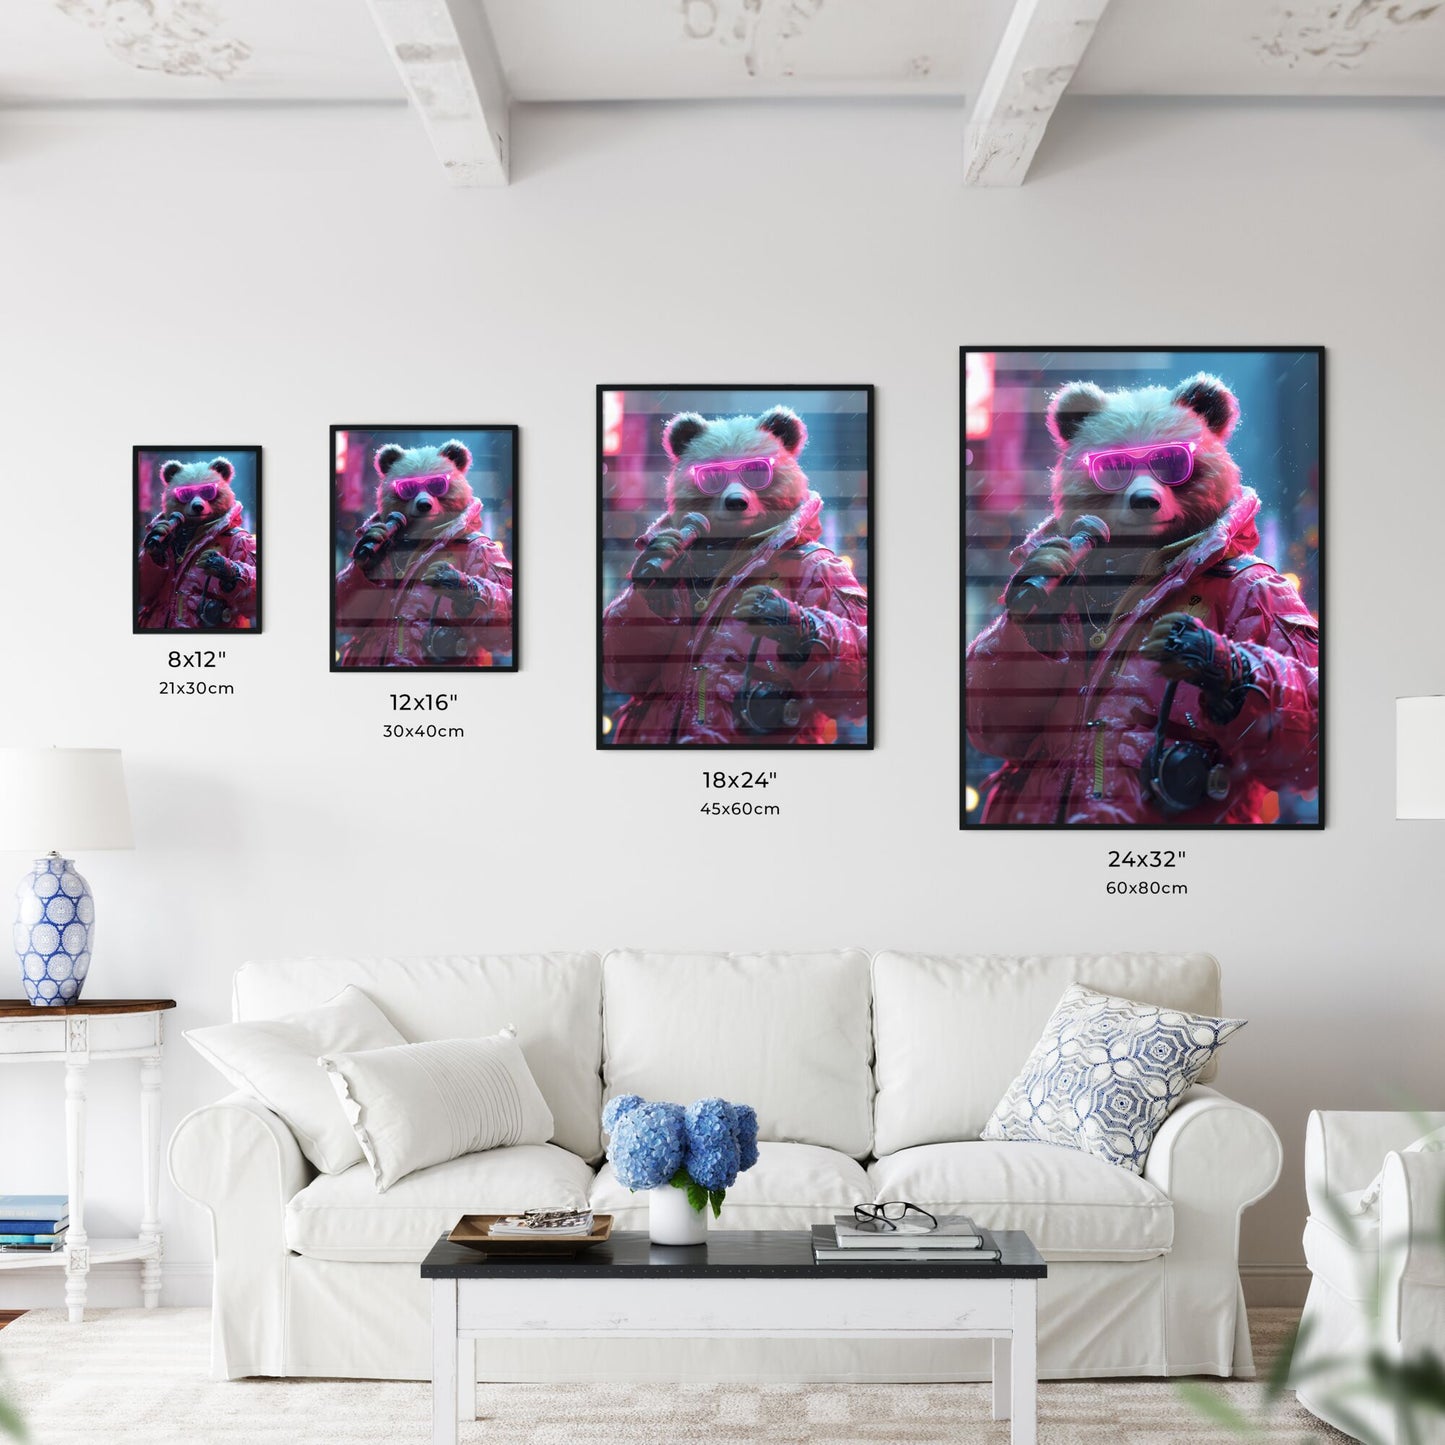 A clever, cool teddy bear - Art print of a bear wearing pink sunglasses and a pink jacket holding a microphone Default Title